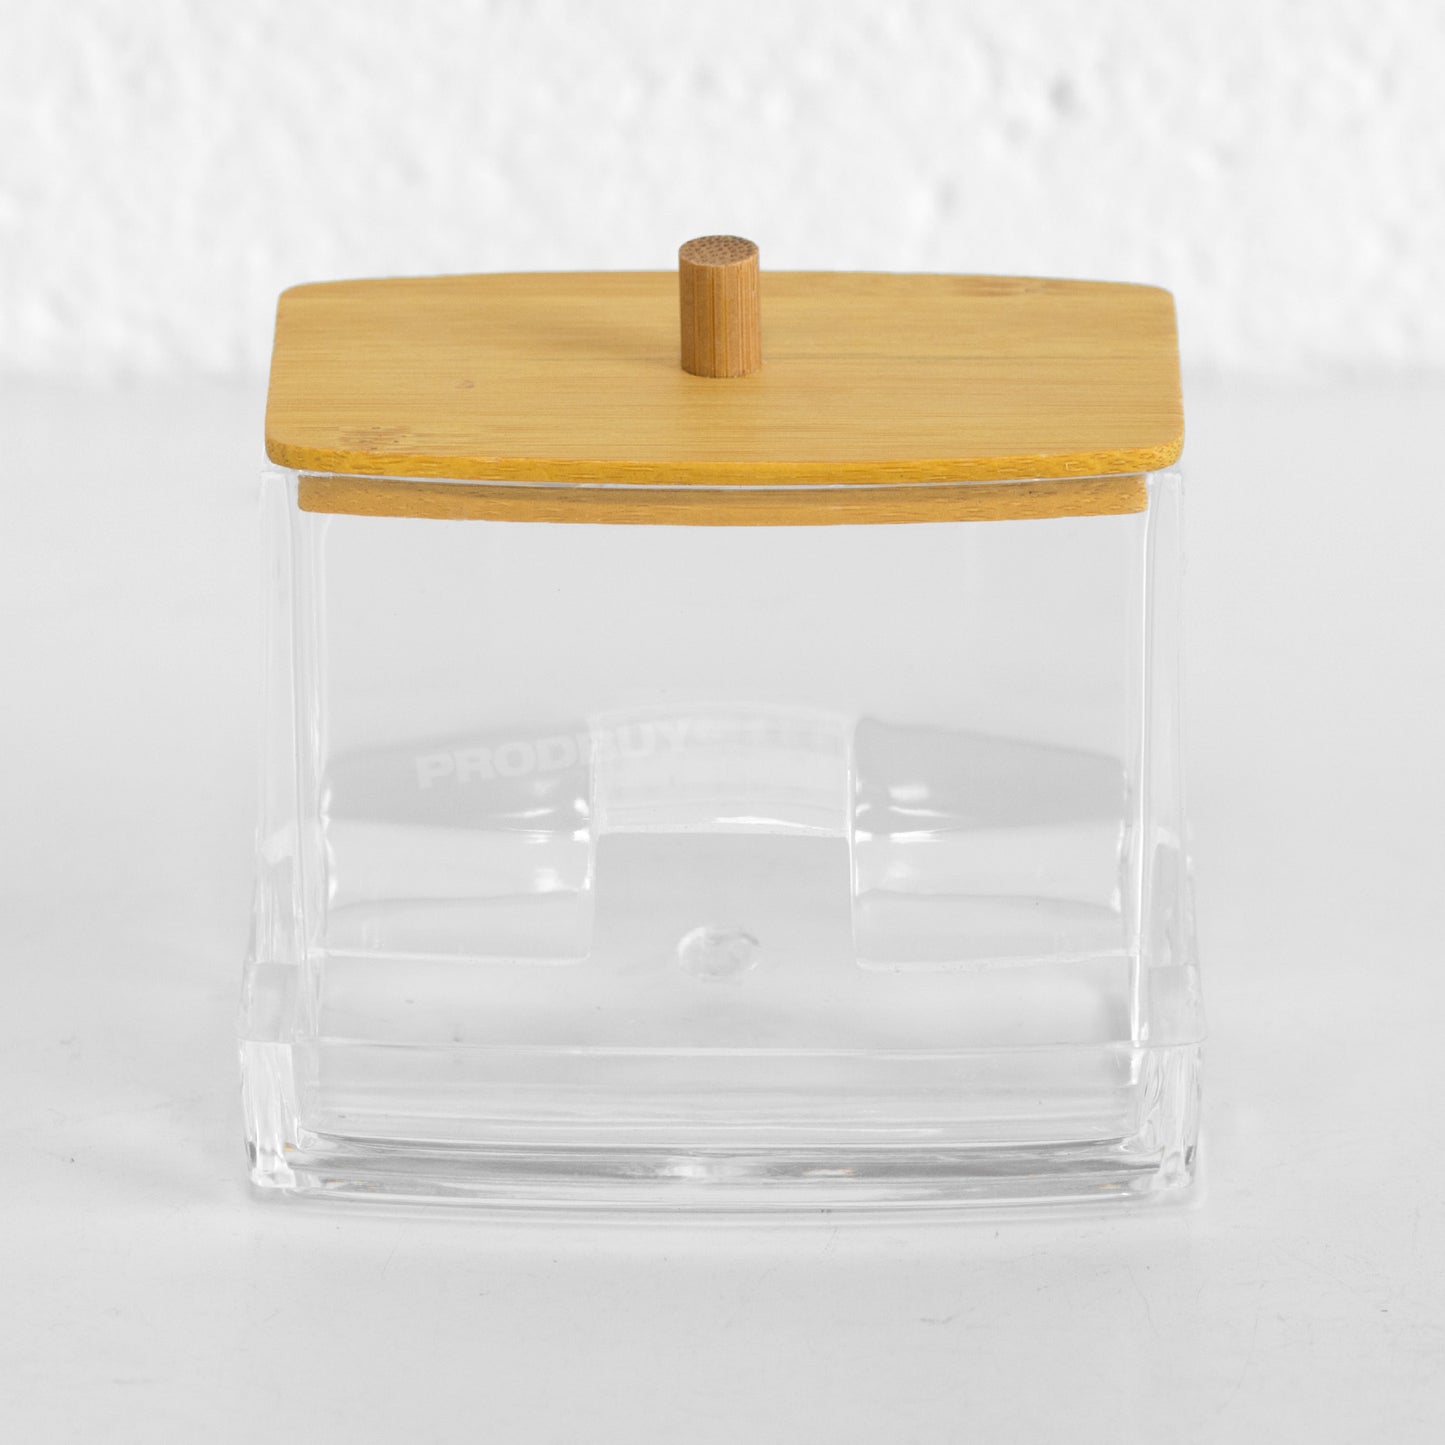 Cotton Bud Dispenser with Bamboo Lid